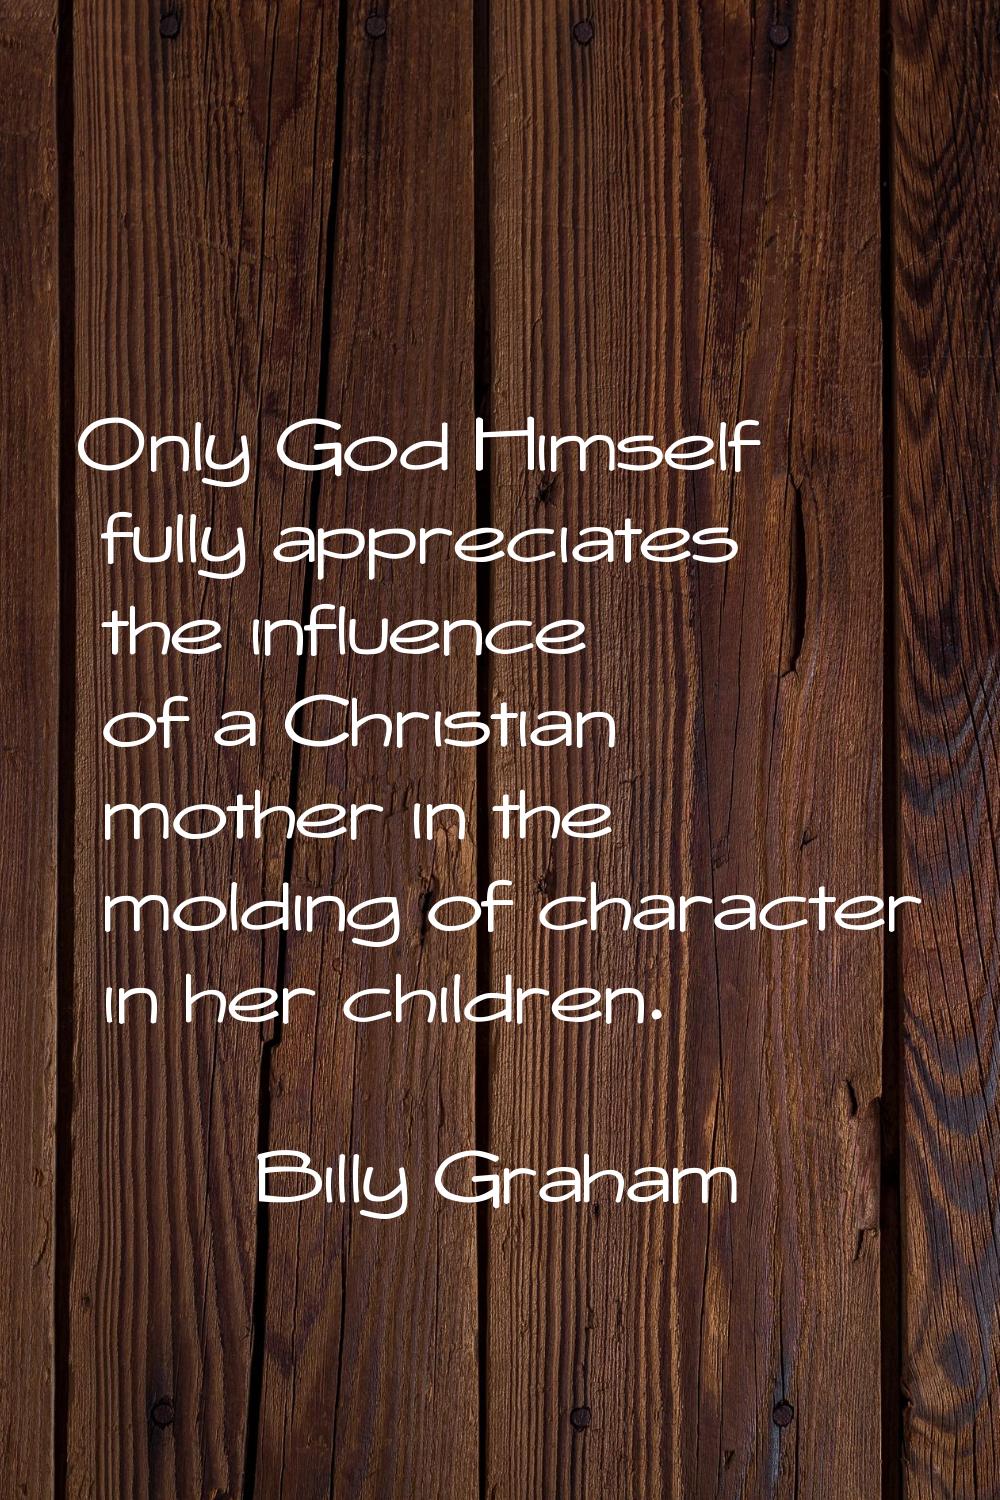 Only God Himself fully appreciates the influence of a Christian mother in the molding of character 